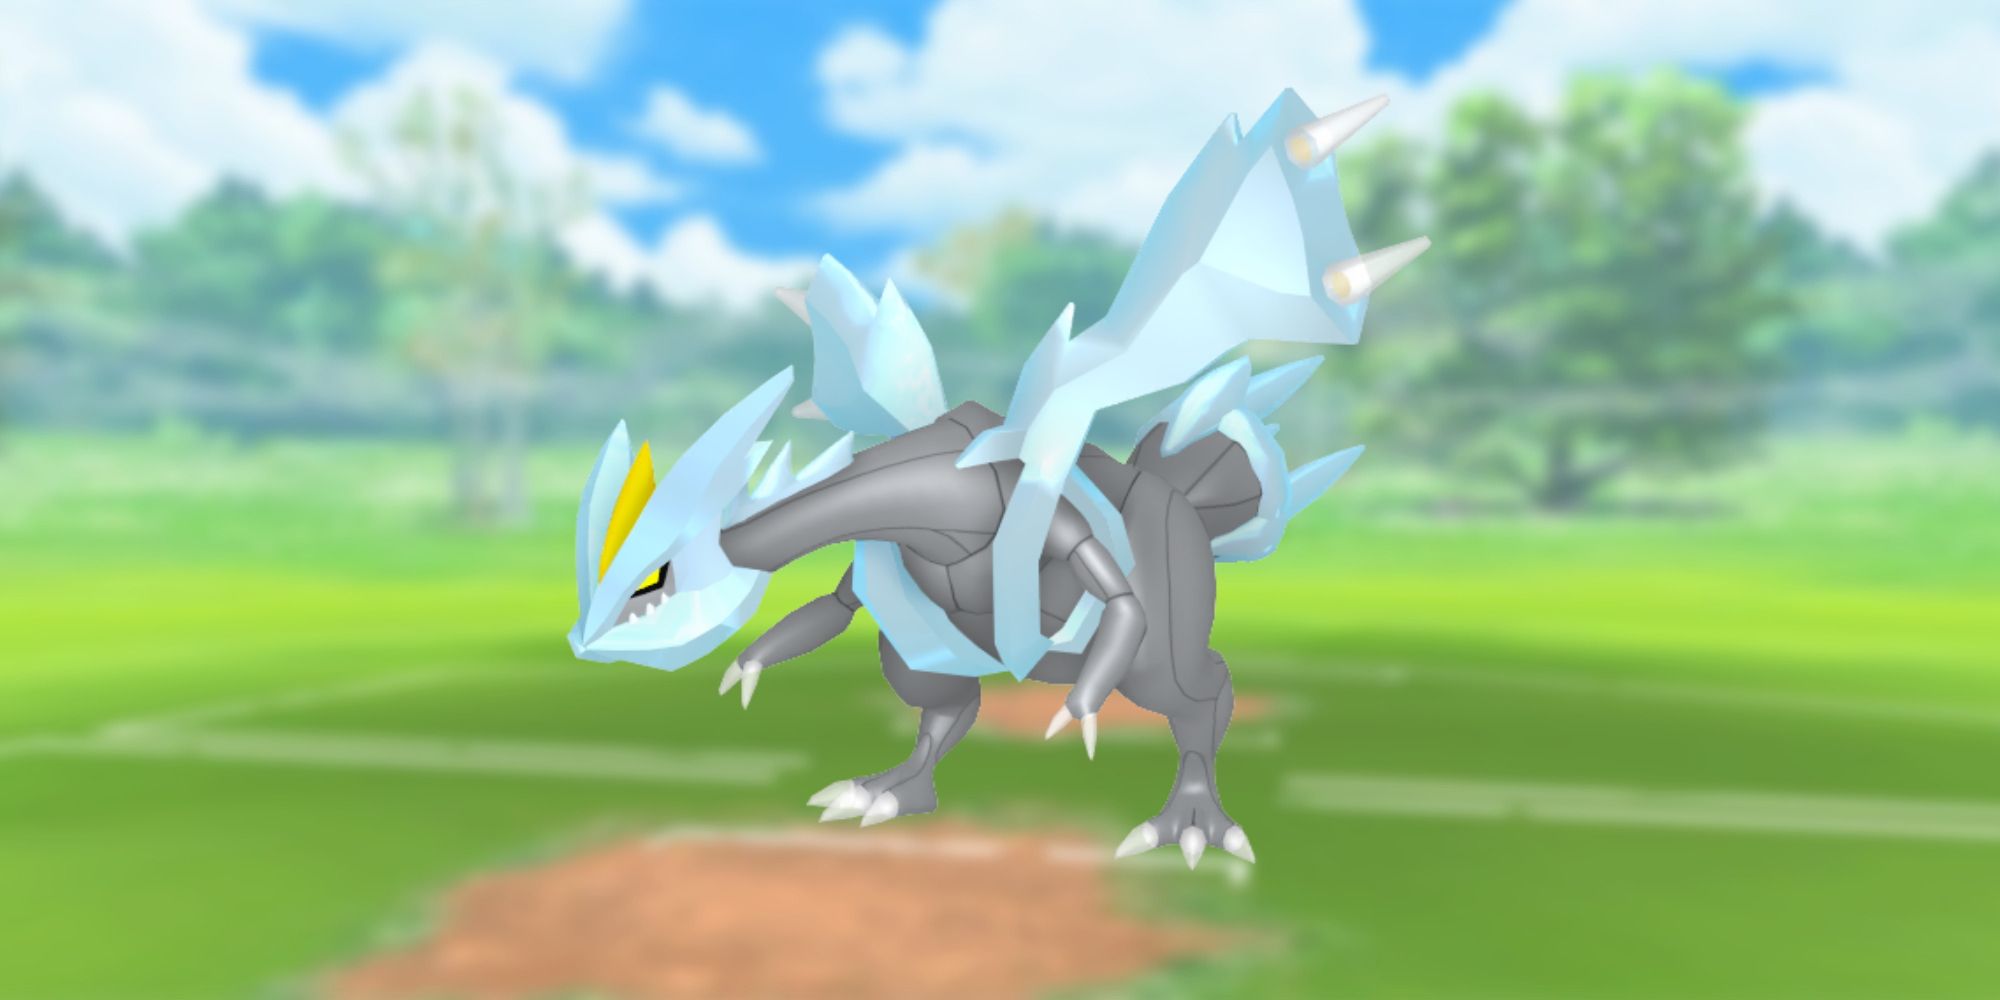 Kyurem from Pokemon with the Pokemon Go battlefield as the background